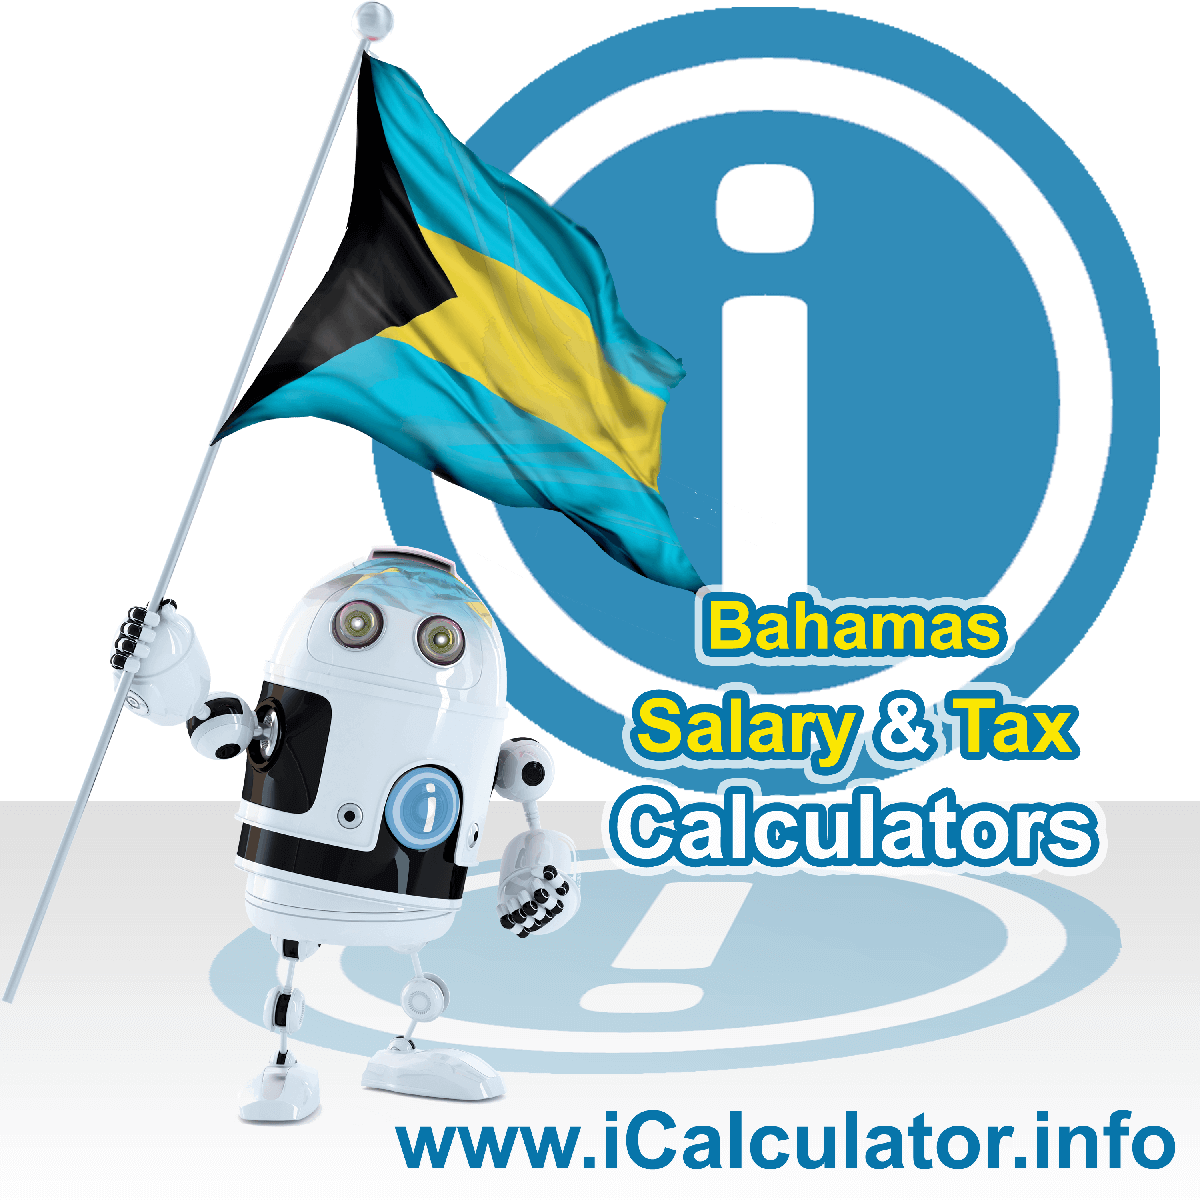 Bahamas Wage Calculator. This image shows the Bahamas flag and information relating to the tax formula for the Bahamas Tax Calculator